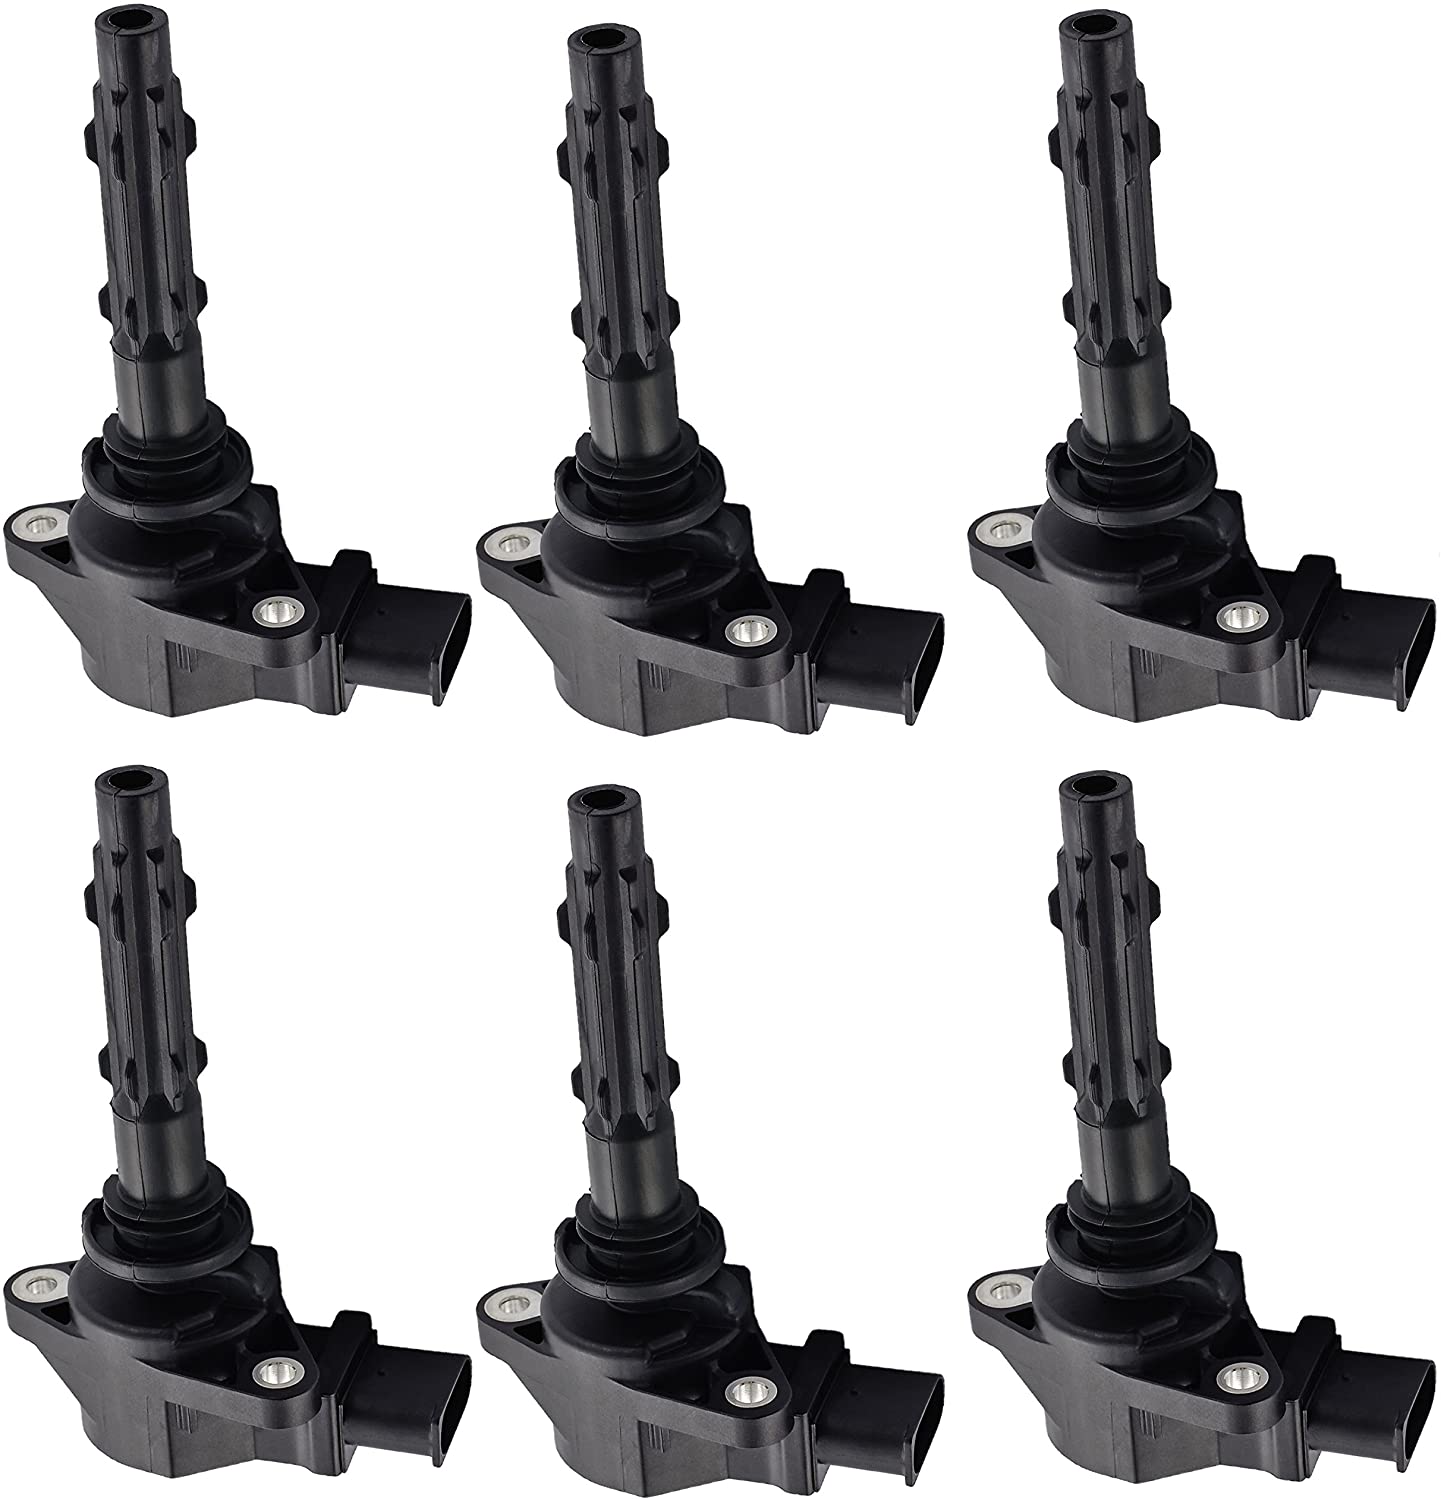 ENA Pack of 6 Ignition Coils Compatible with 06-15 Mercedes Benz CLK ML E C GLK R SLK Class V6 3.5L Compatible with 0001501980 19005267 68011844AA 2729060060 0001502780